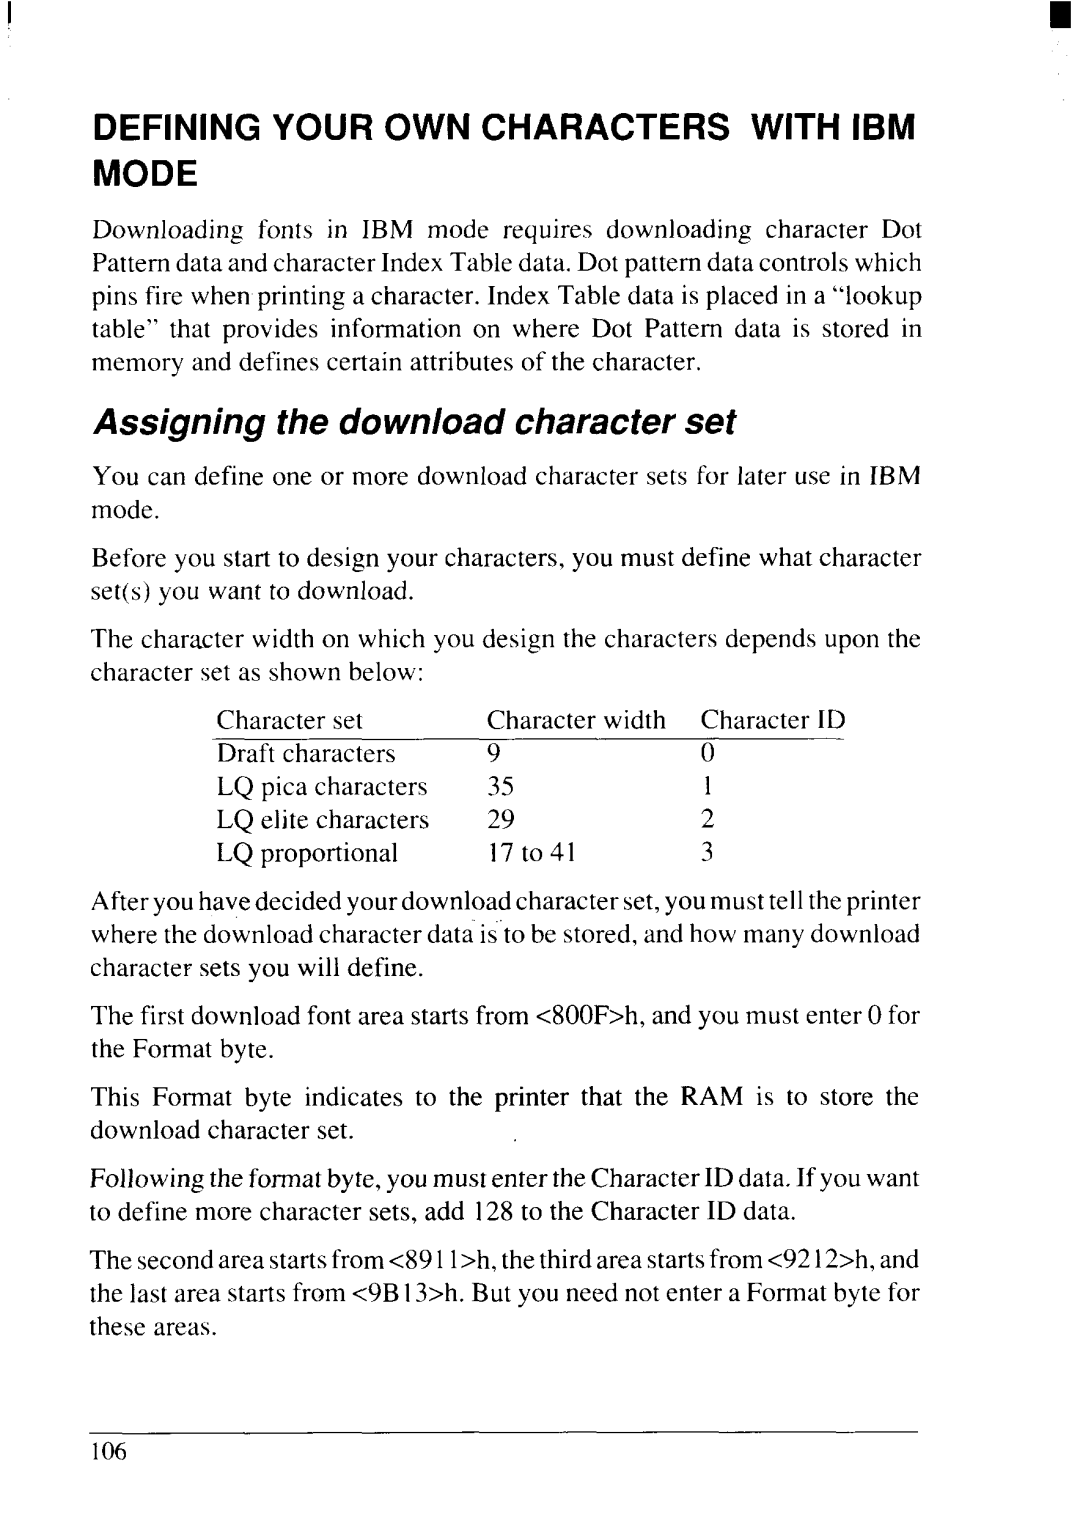 Star Micronics NX-2415II user manual Defining Your Own Characters With Ibm Mode, Assigning the download character set 